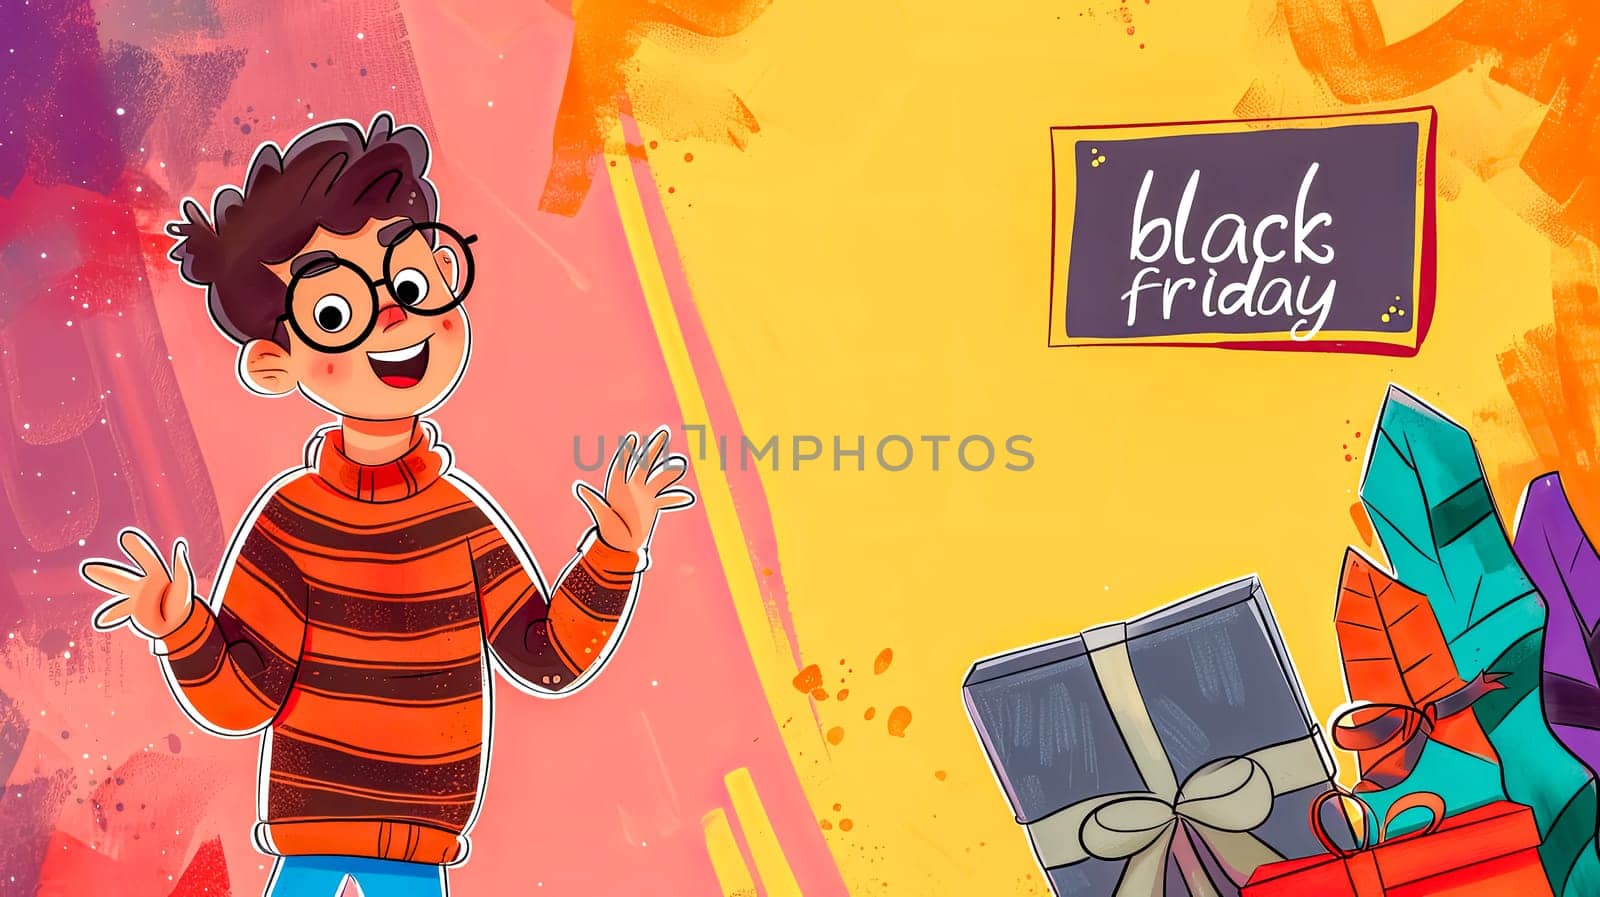 Animated character thrilled by black friday deals, with gifts and colorful background